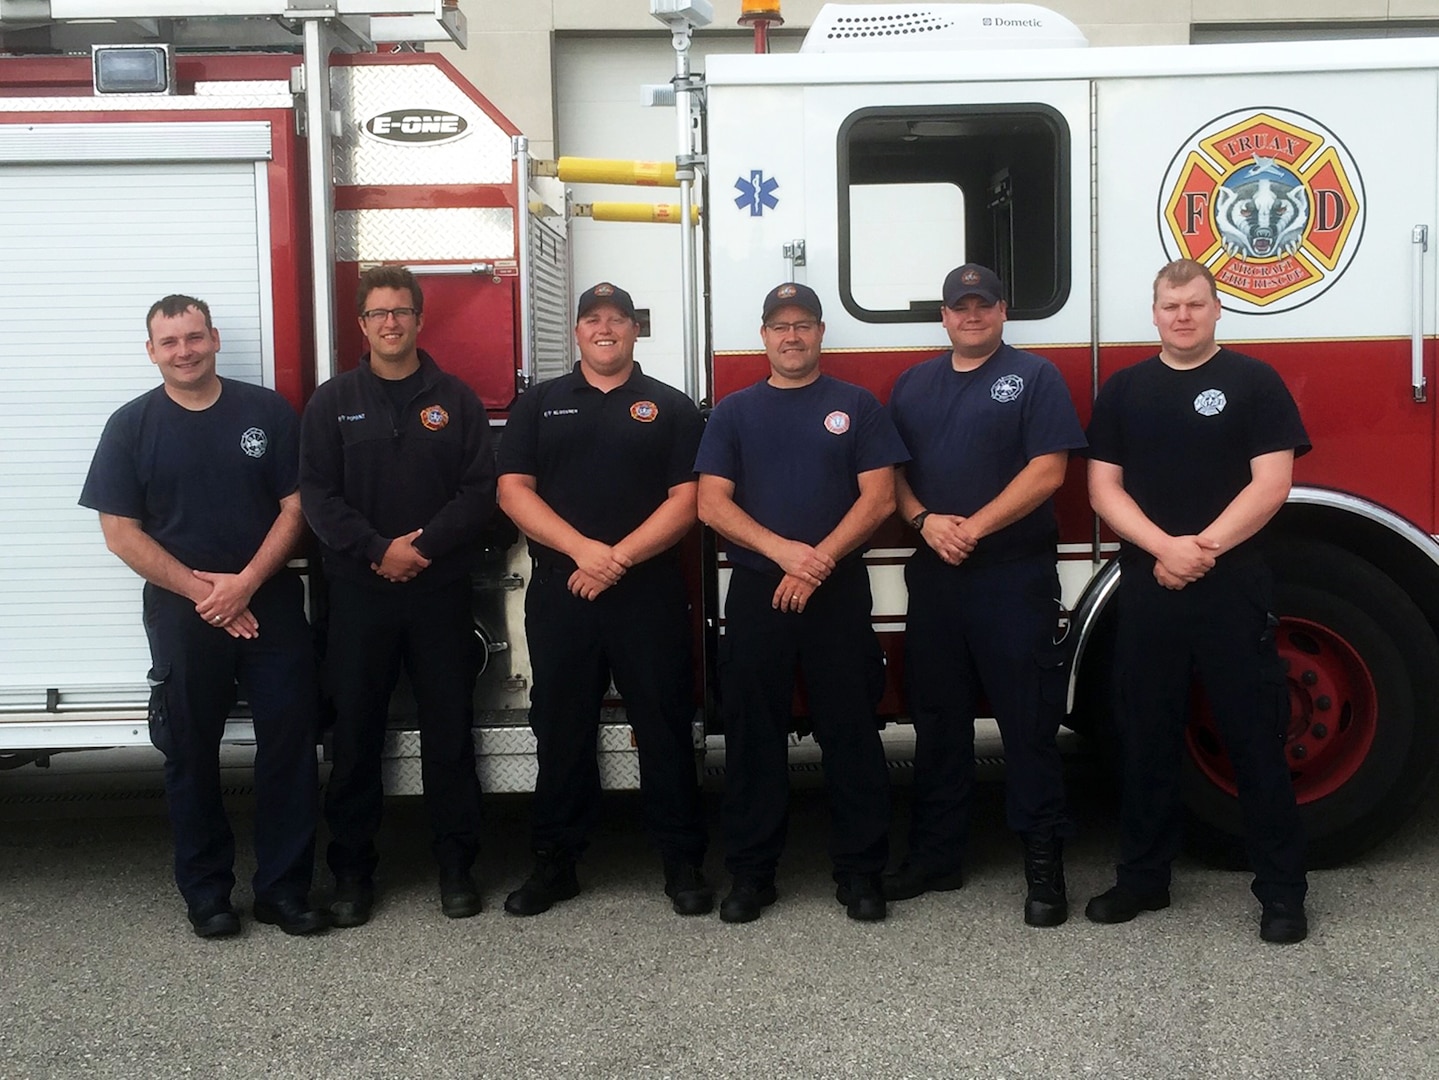 A team of firefighters from the 115th Fighter Wing Truax Fire and Emergency Services pose for a photo outside thier fire truck in Madison, Wis., June 6, 2016. This team of firefighters helped save a woman's life by performing cardiopulmonary resuscitation after she collapsed on a jet.